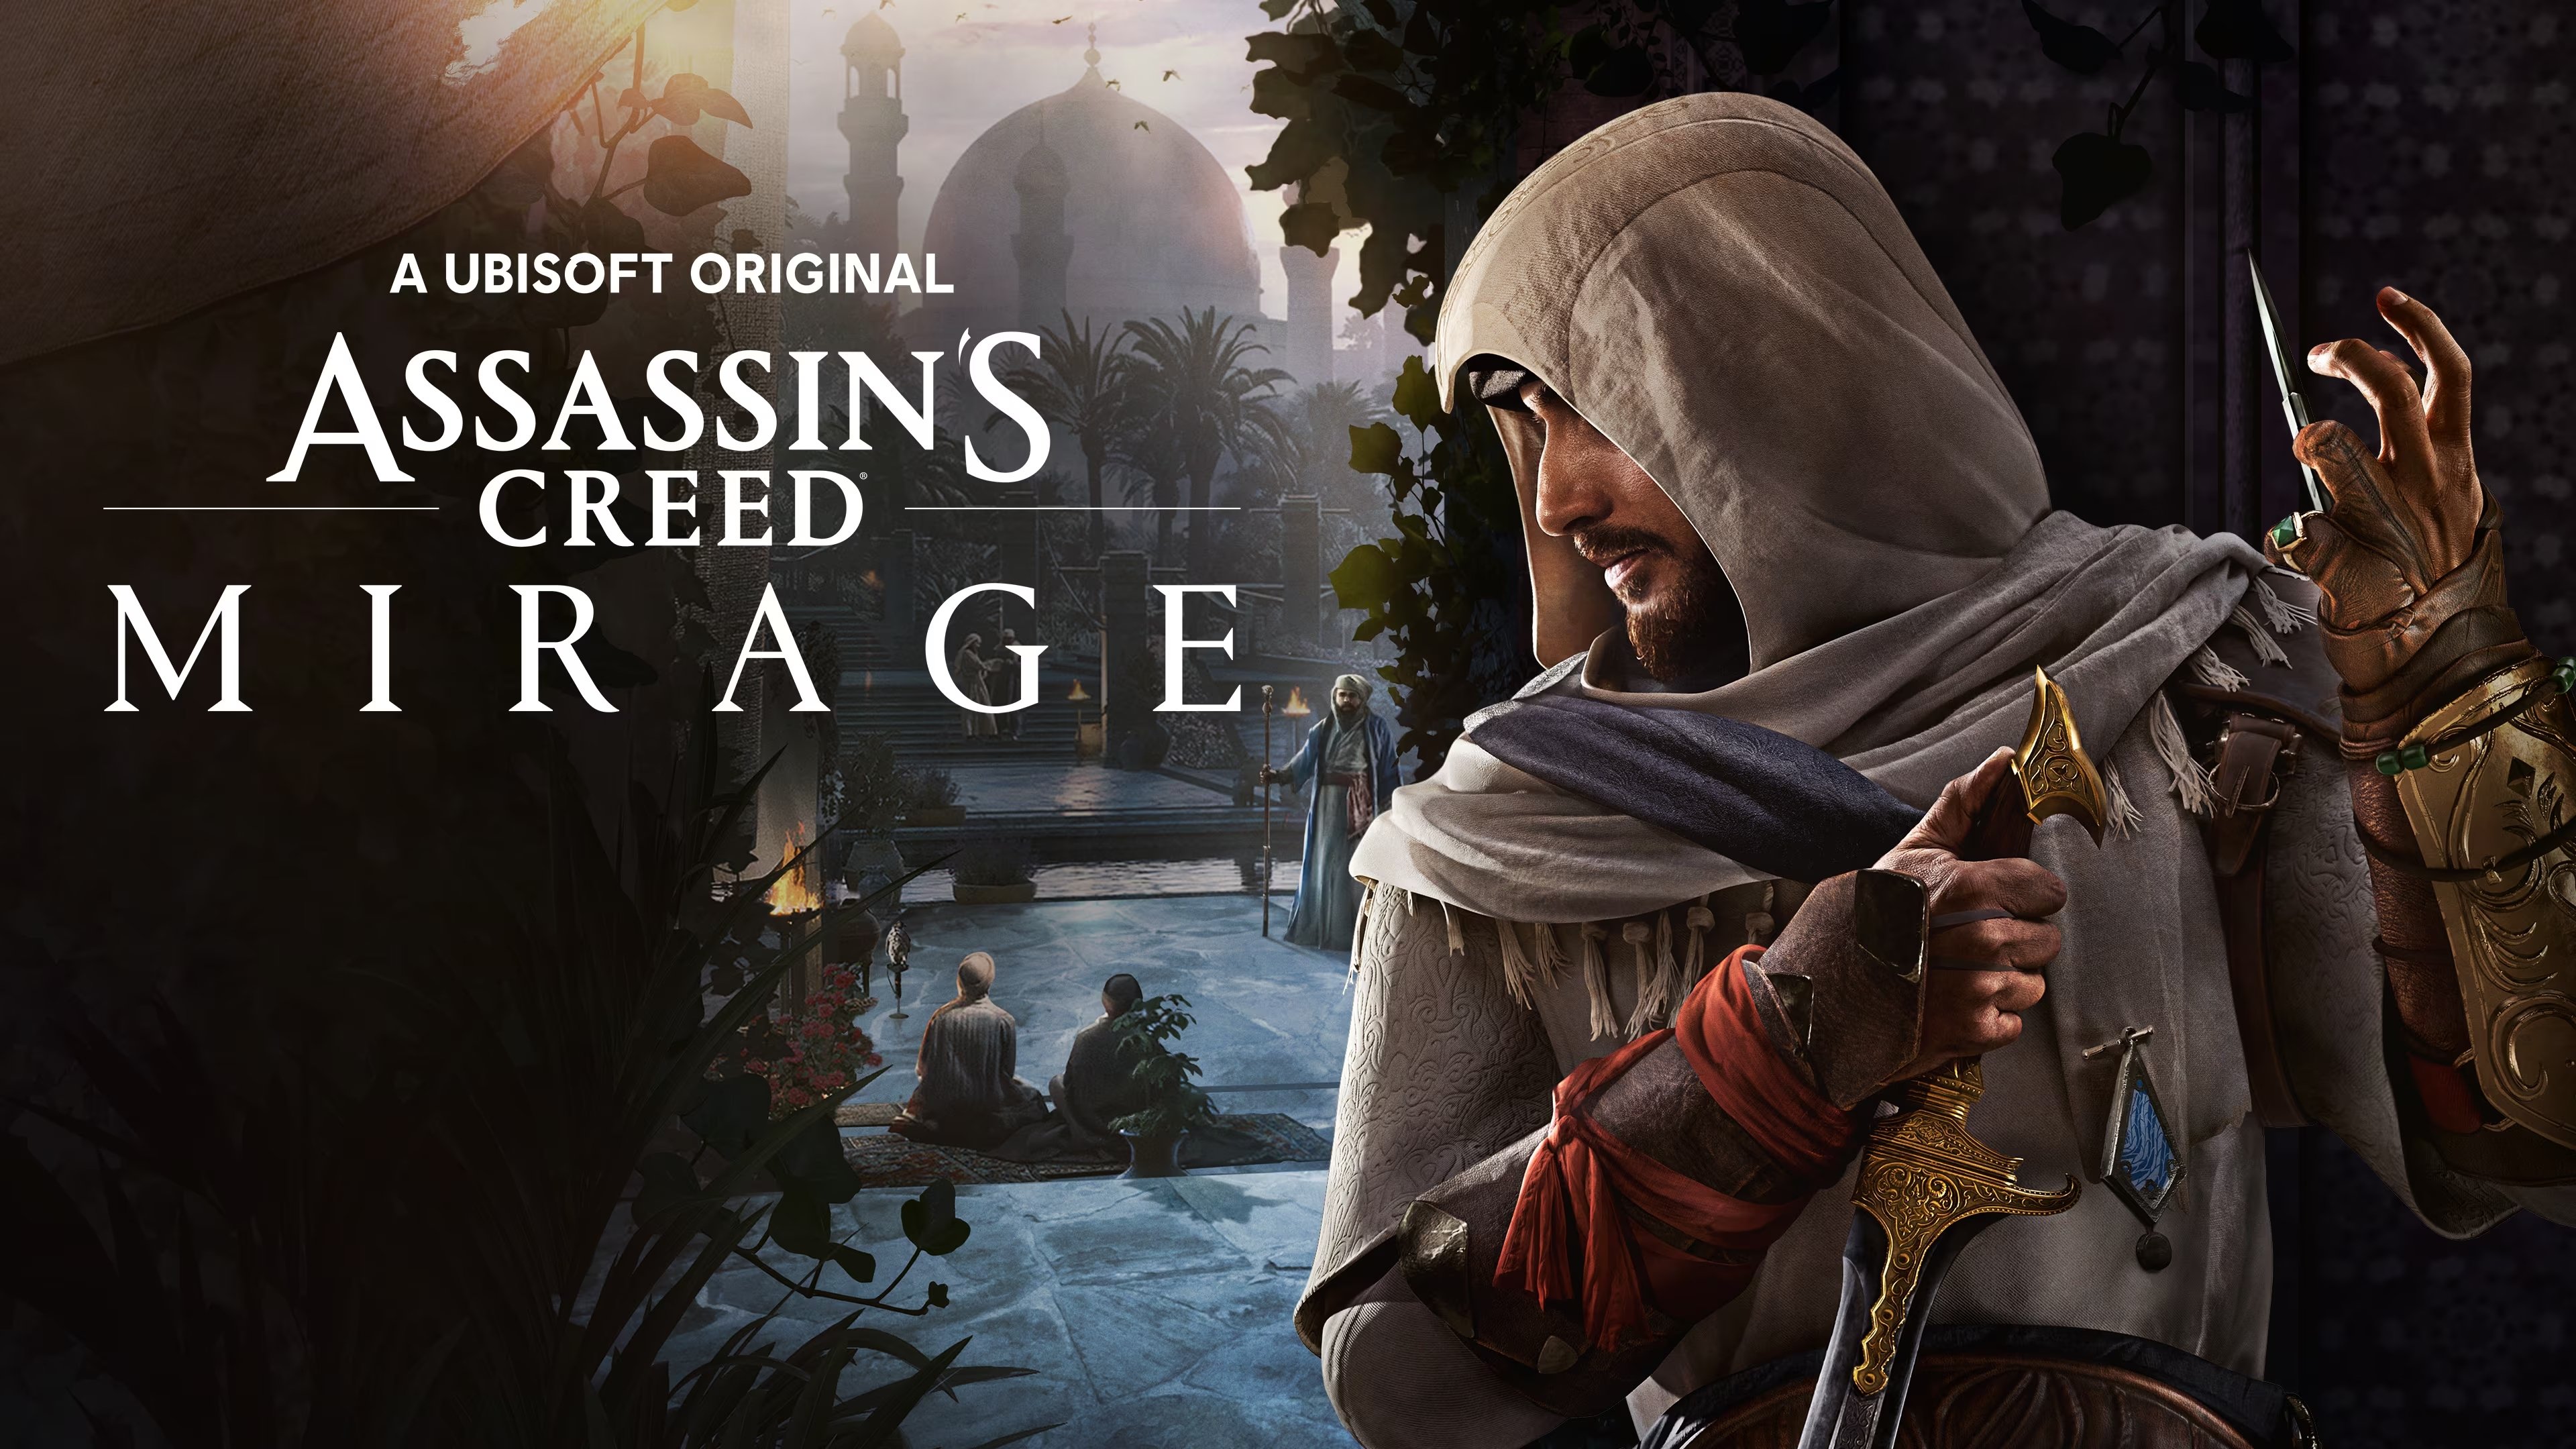 Assassin’s Creed Mirage trailer